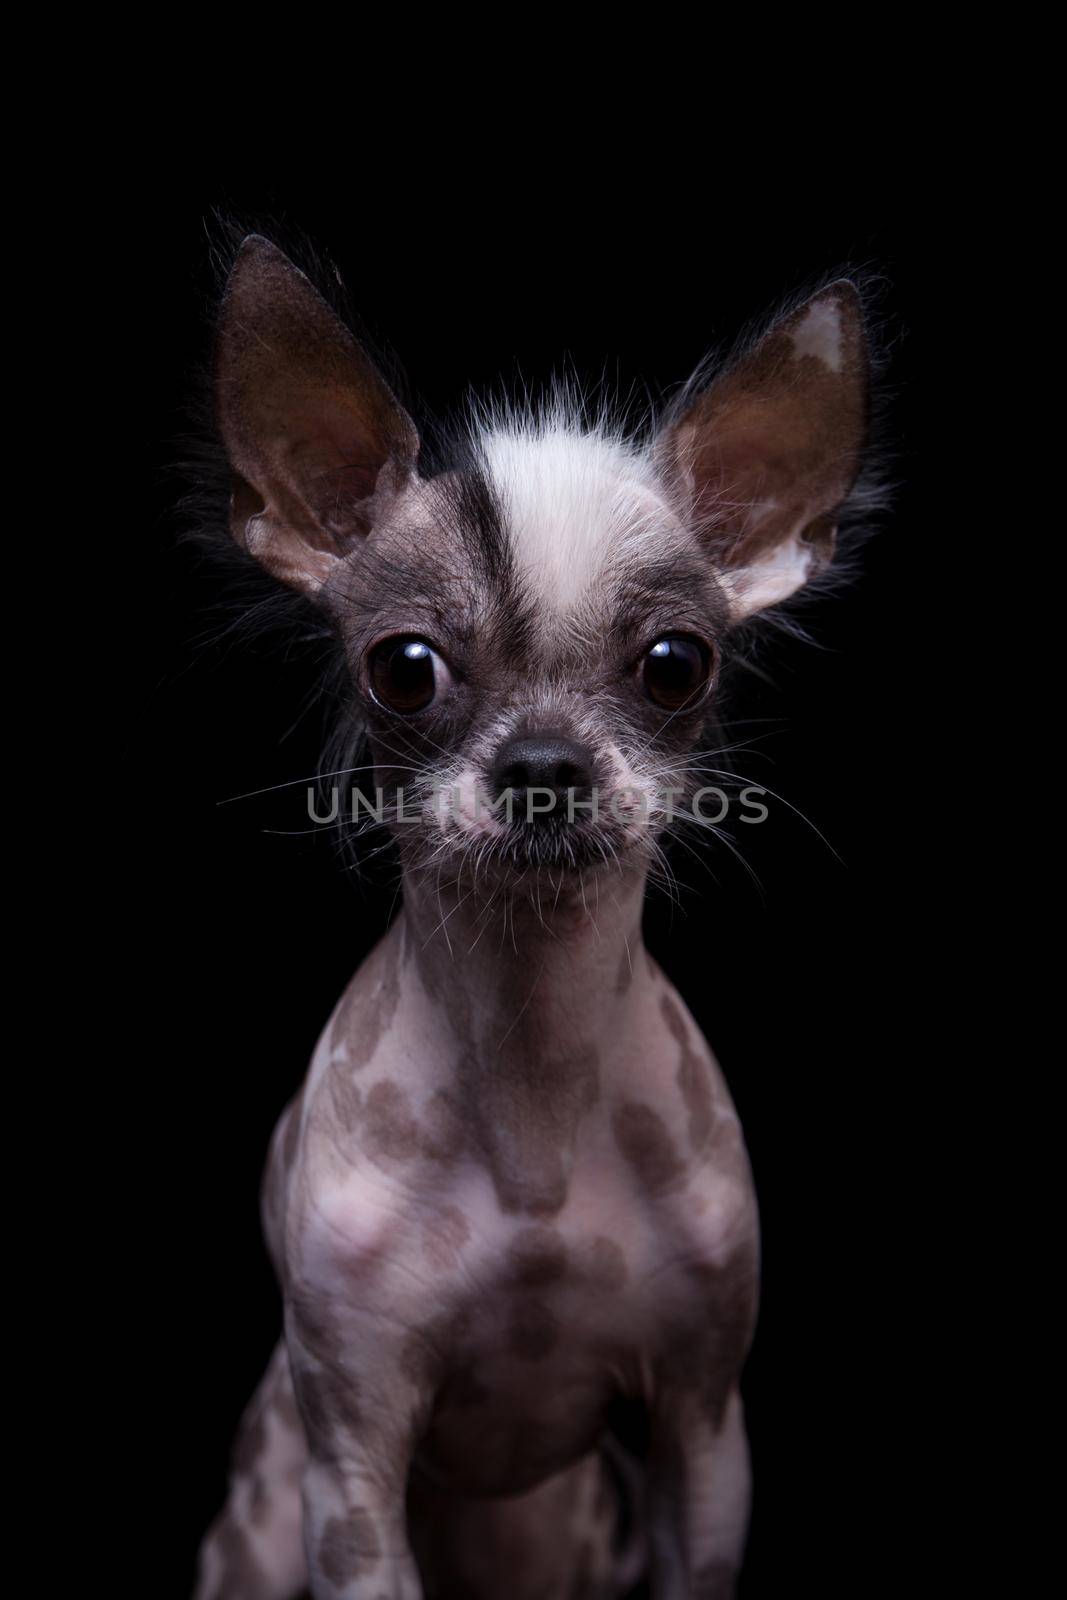 Peruvian hairless and chihuahua mix dog isolated on black background